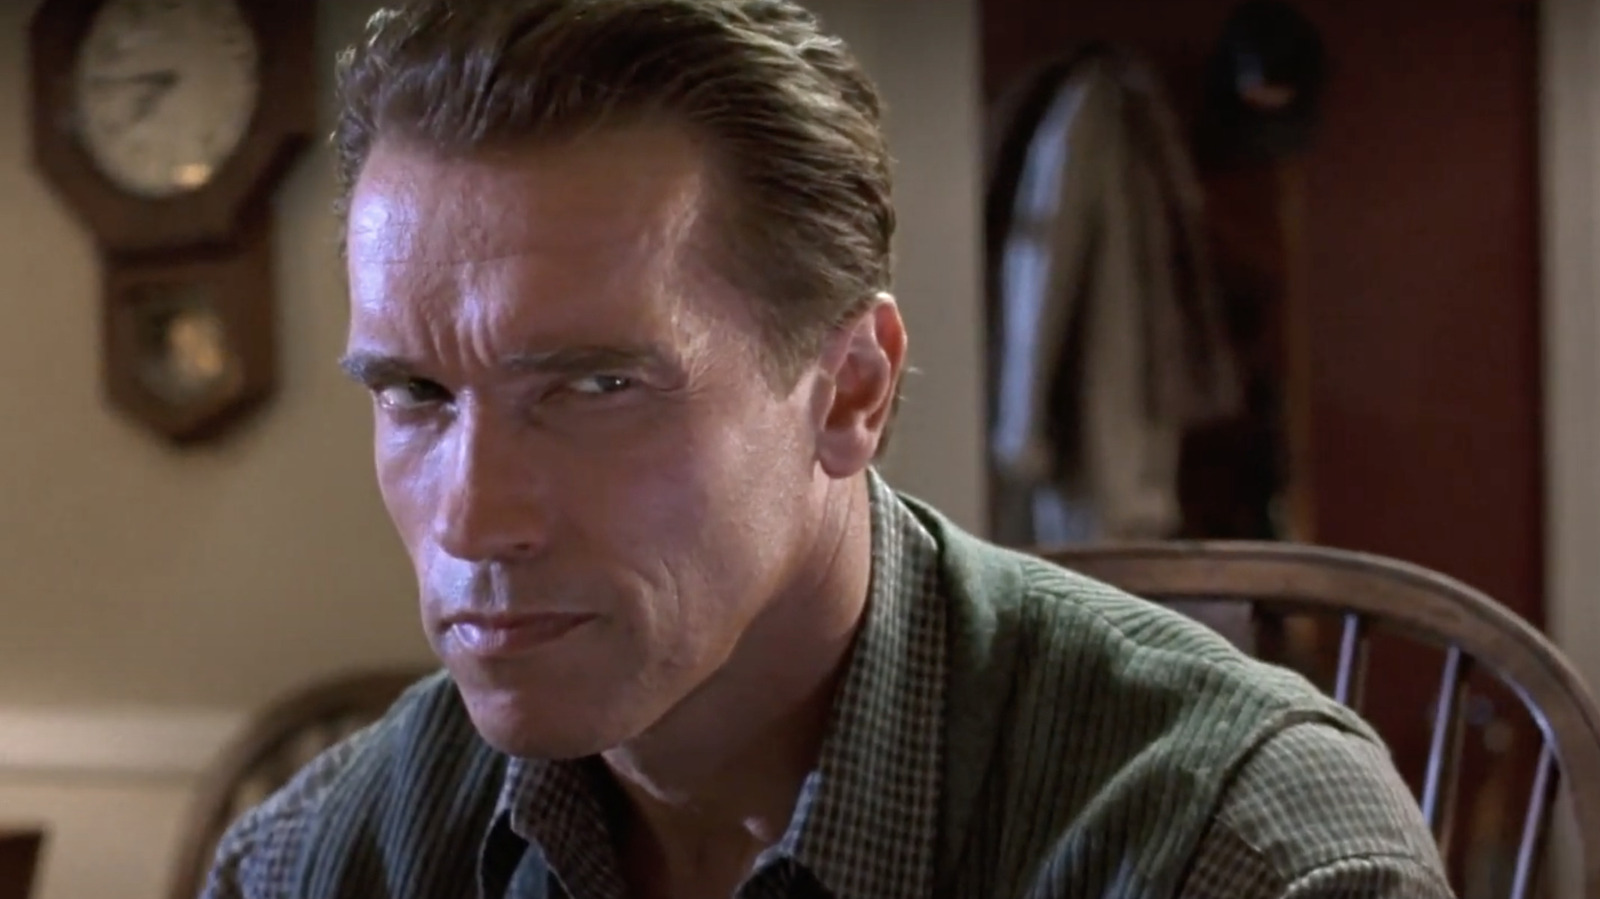 True Lies TV Series Casts Someone Who Is Not Arnold Schwarzenegger In